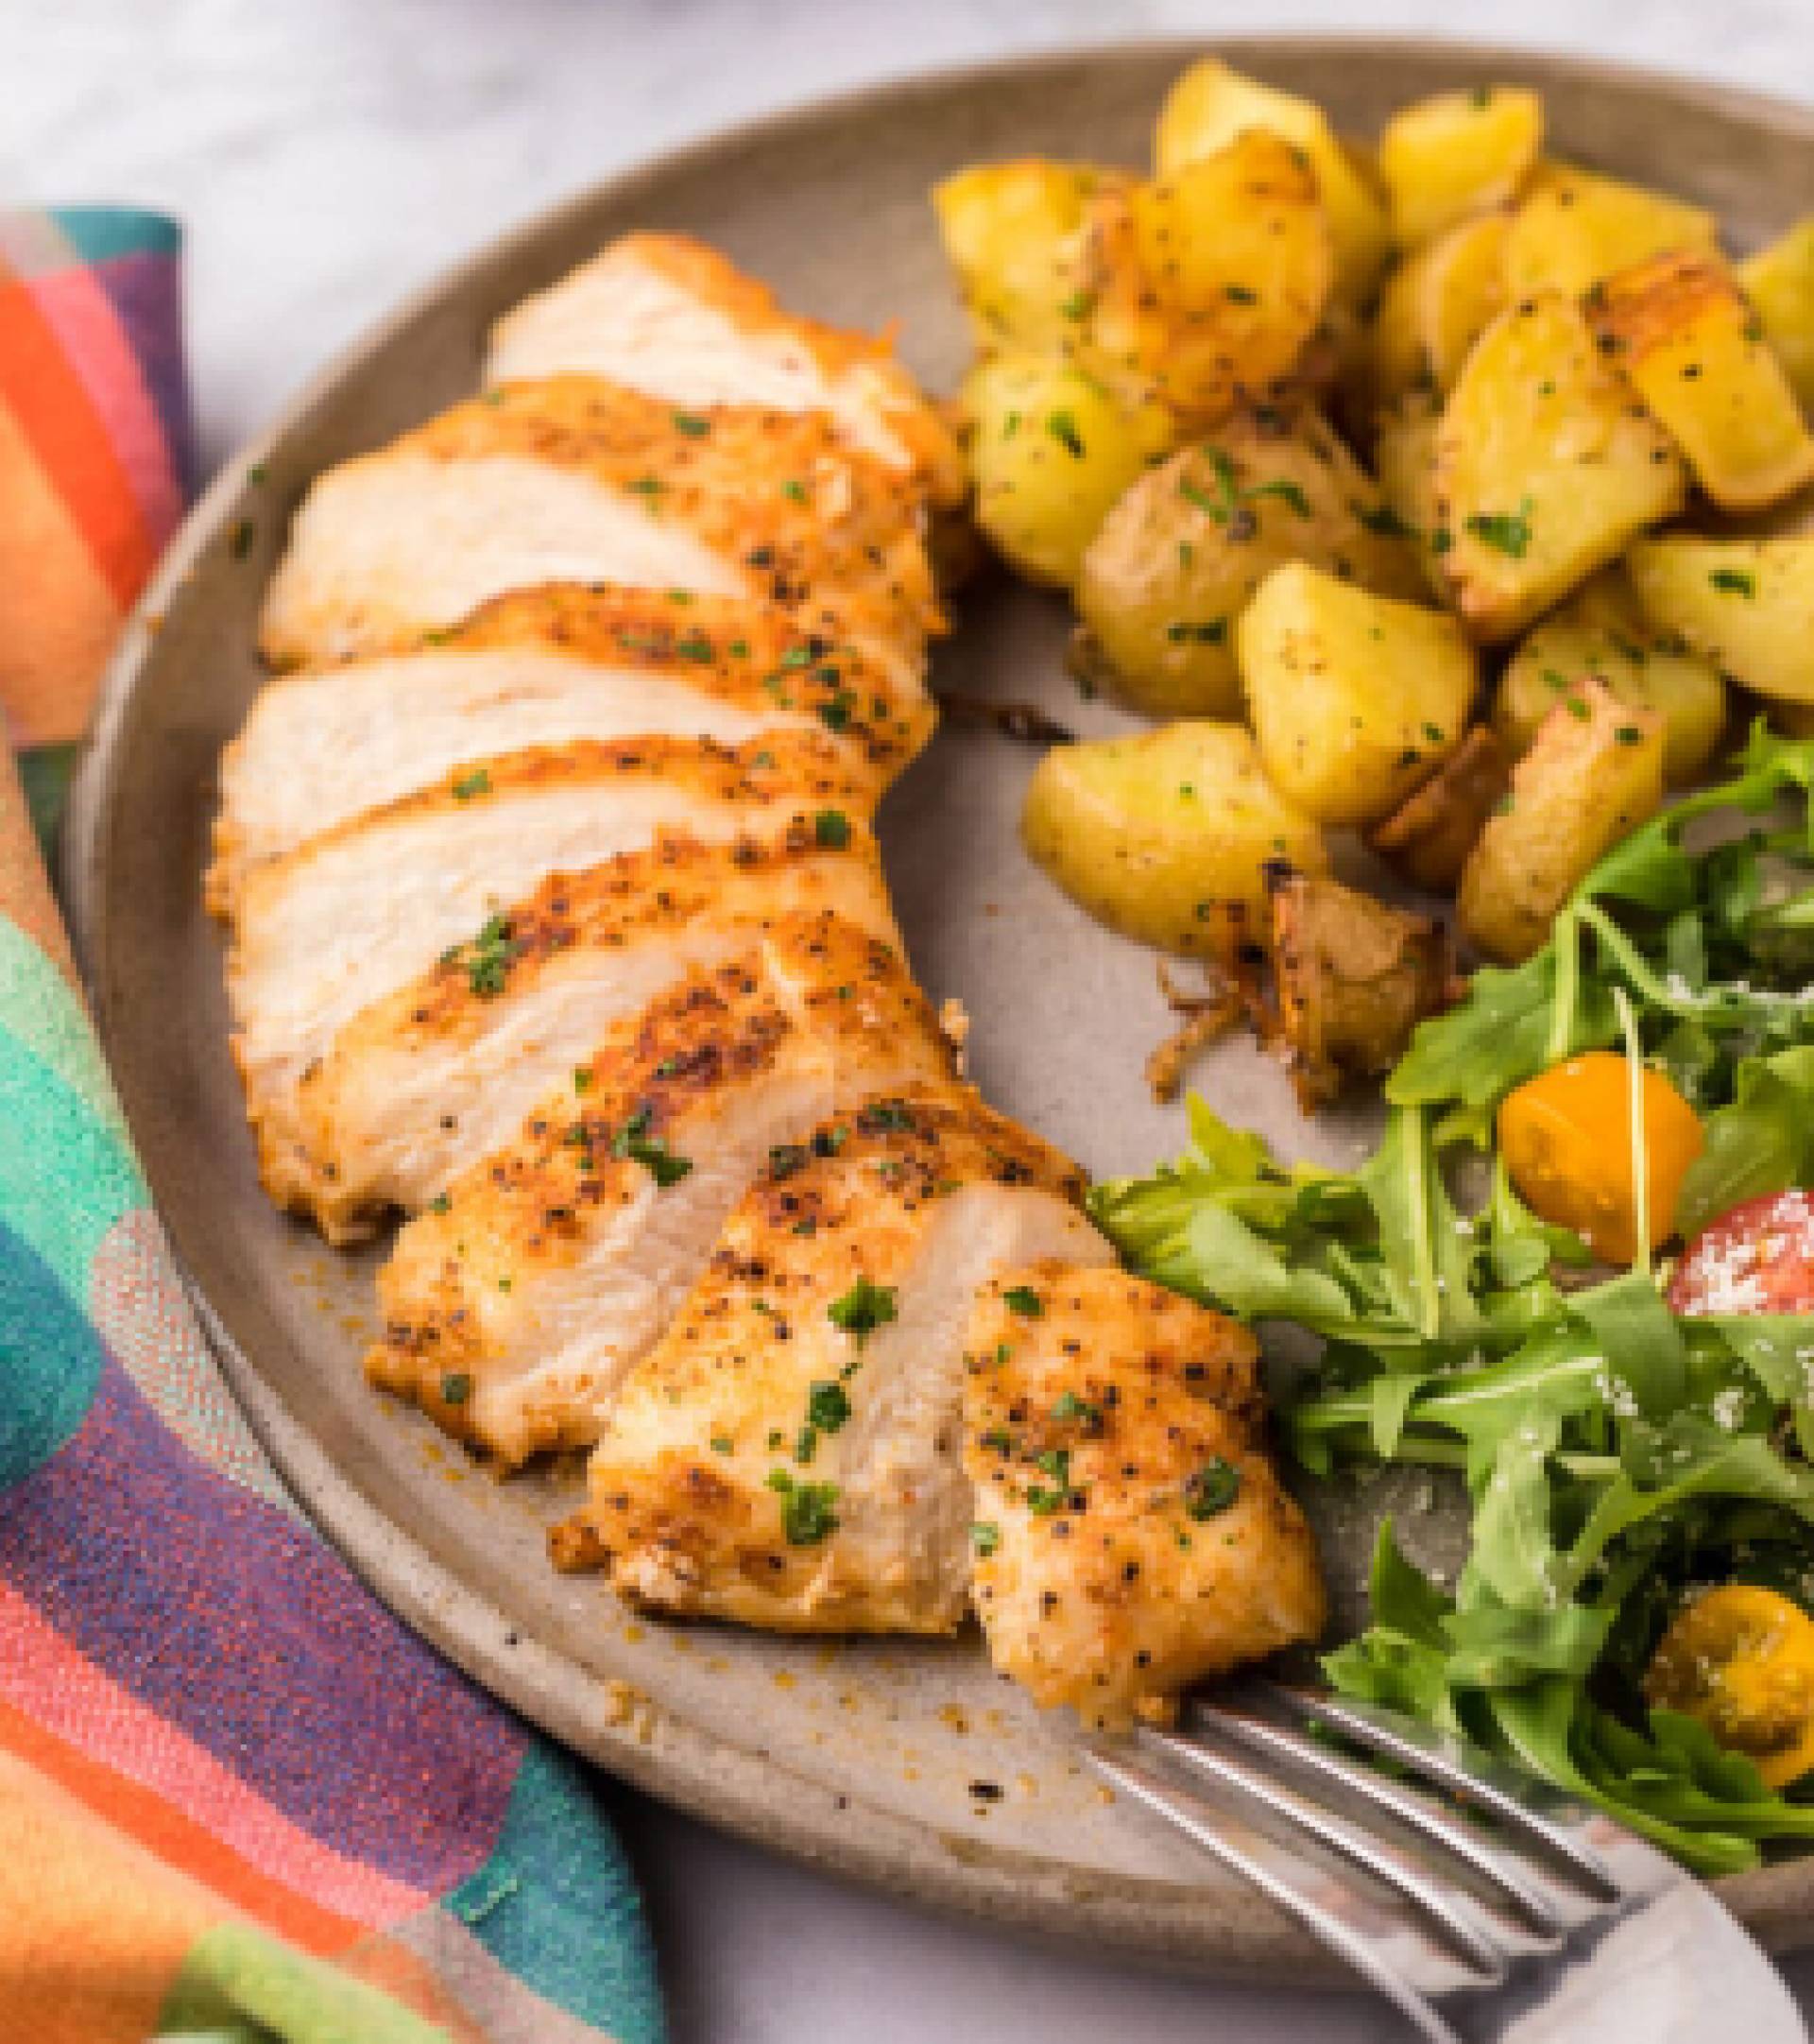 Blackened Chicken Breast with Roasted Potatoes (GF)